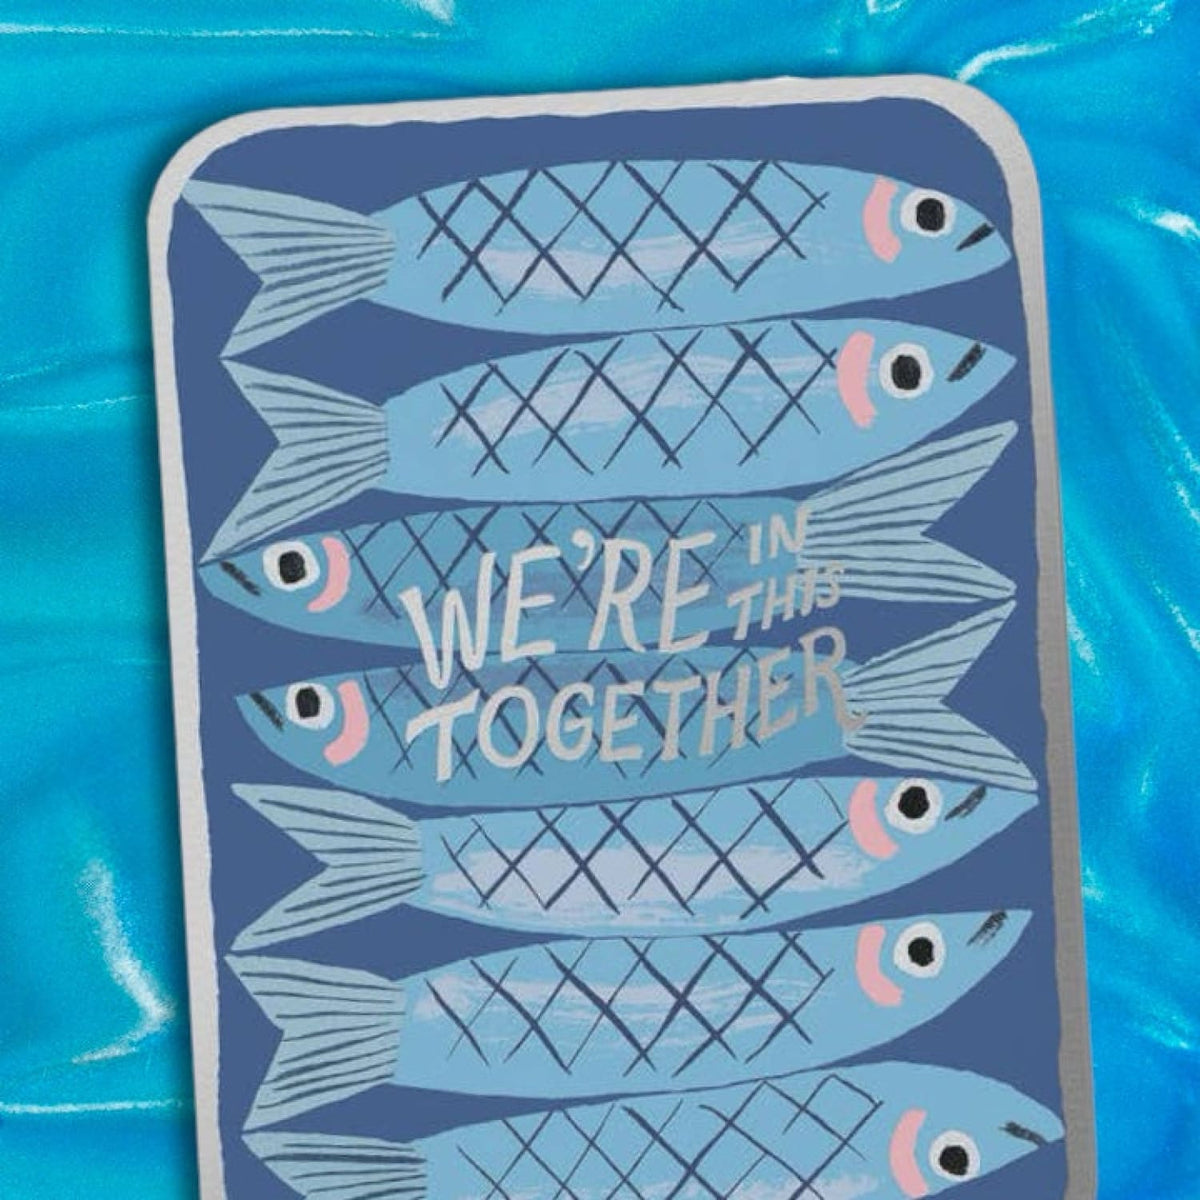 We’re In This Together Sardines Encouragement Greeting